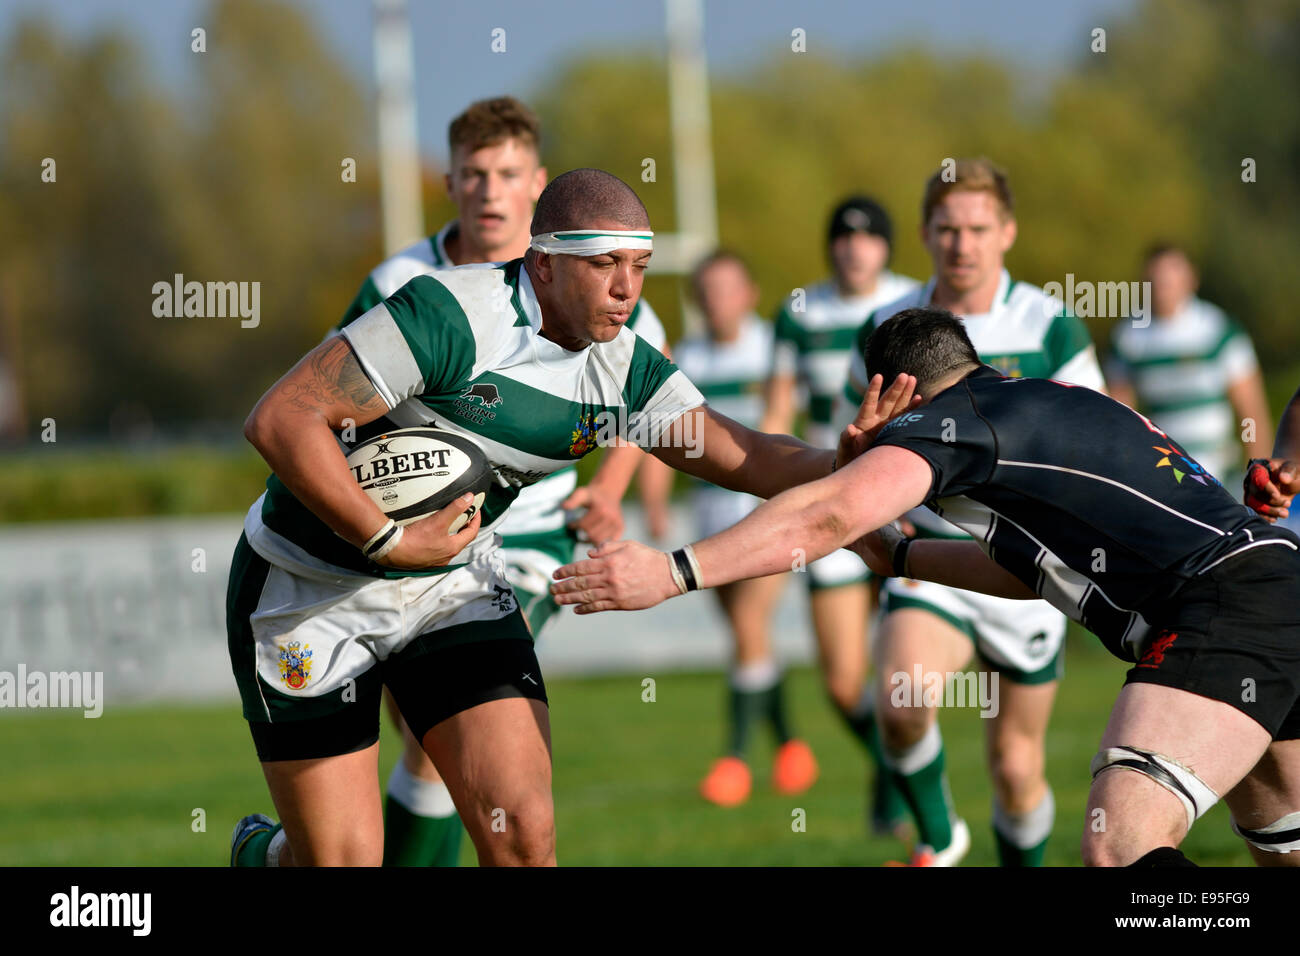 a penrith rugby player is tackled at broughton park rugby club, manchester, uk Stock Photo